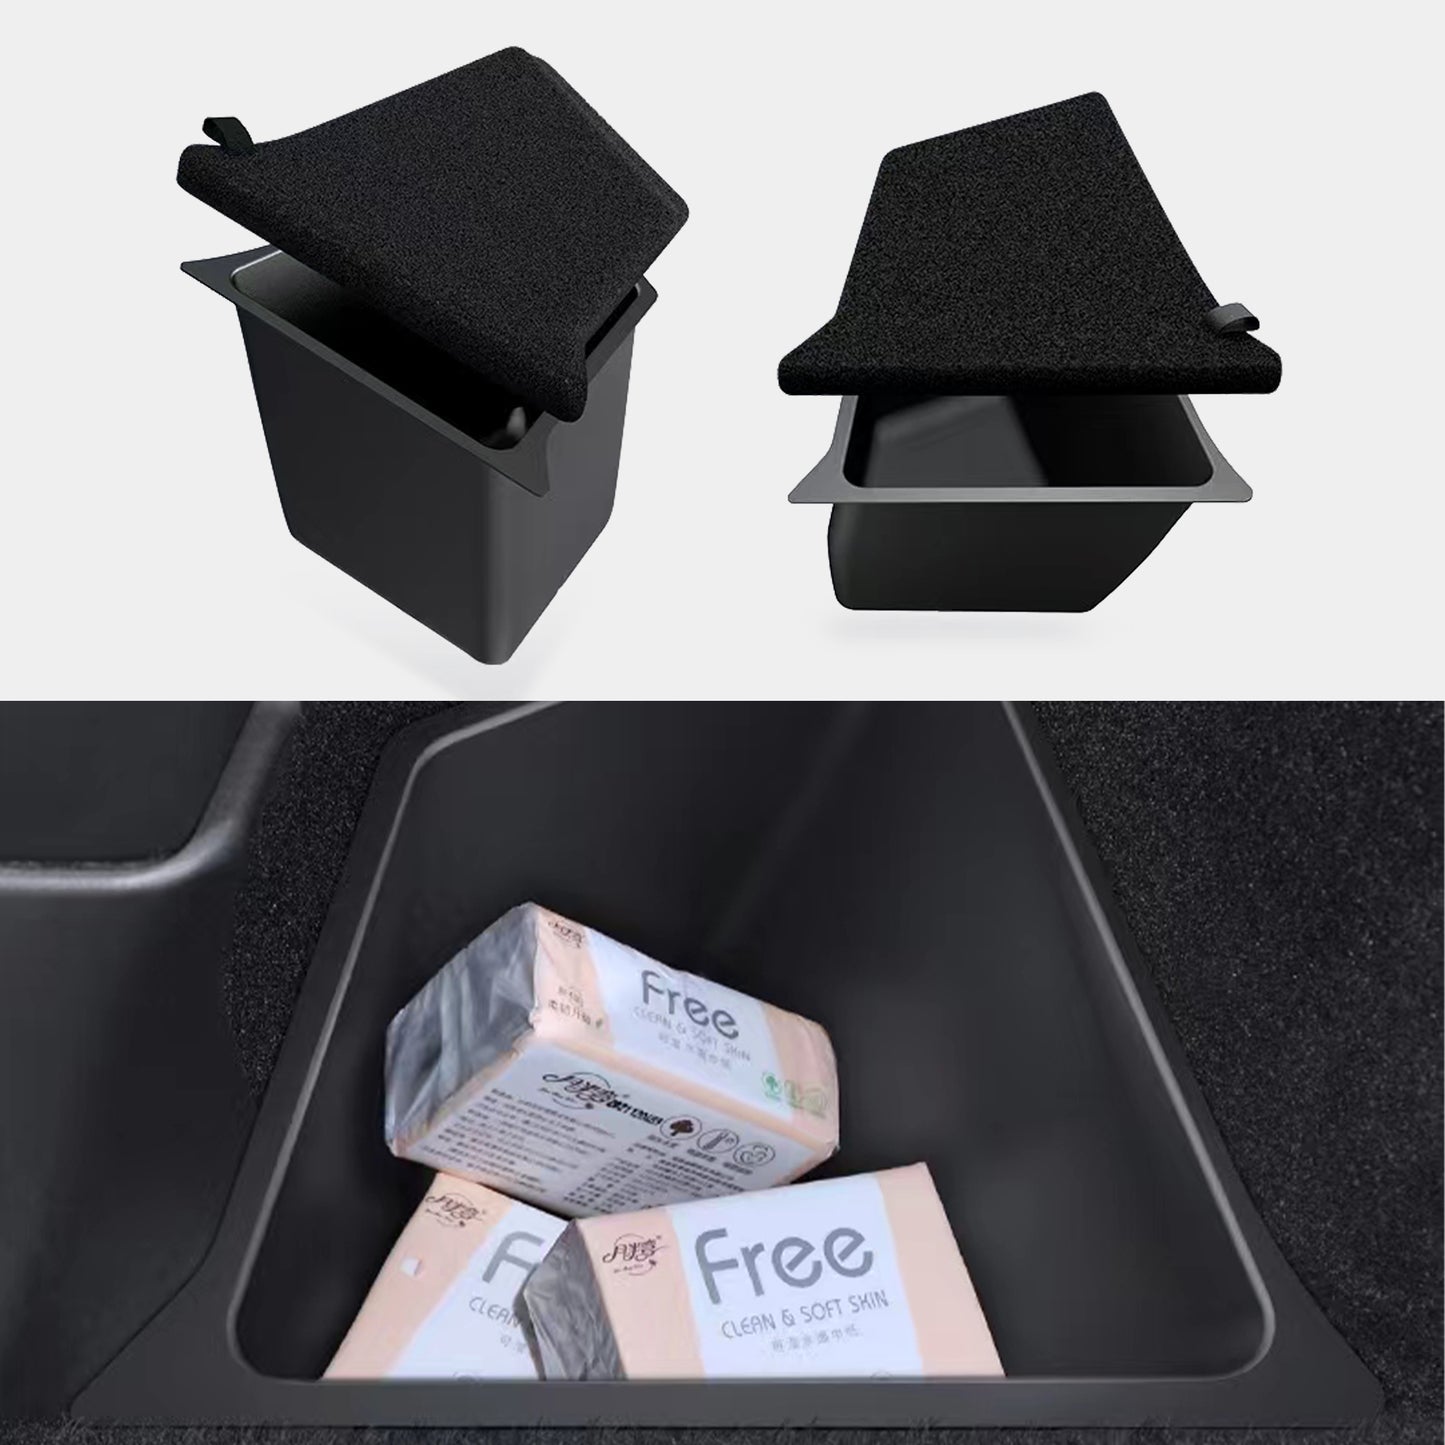 Tesla Model Y Rear Trunk Side Organizer Sorting Bins expands space in the cargo area, prevents items from rolling out of deep grooves High quality TPE material to reduce collisions and protect the items in the box